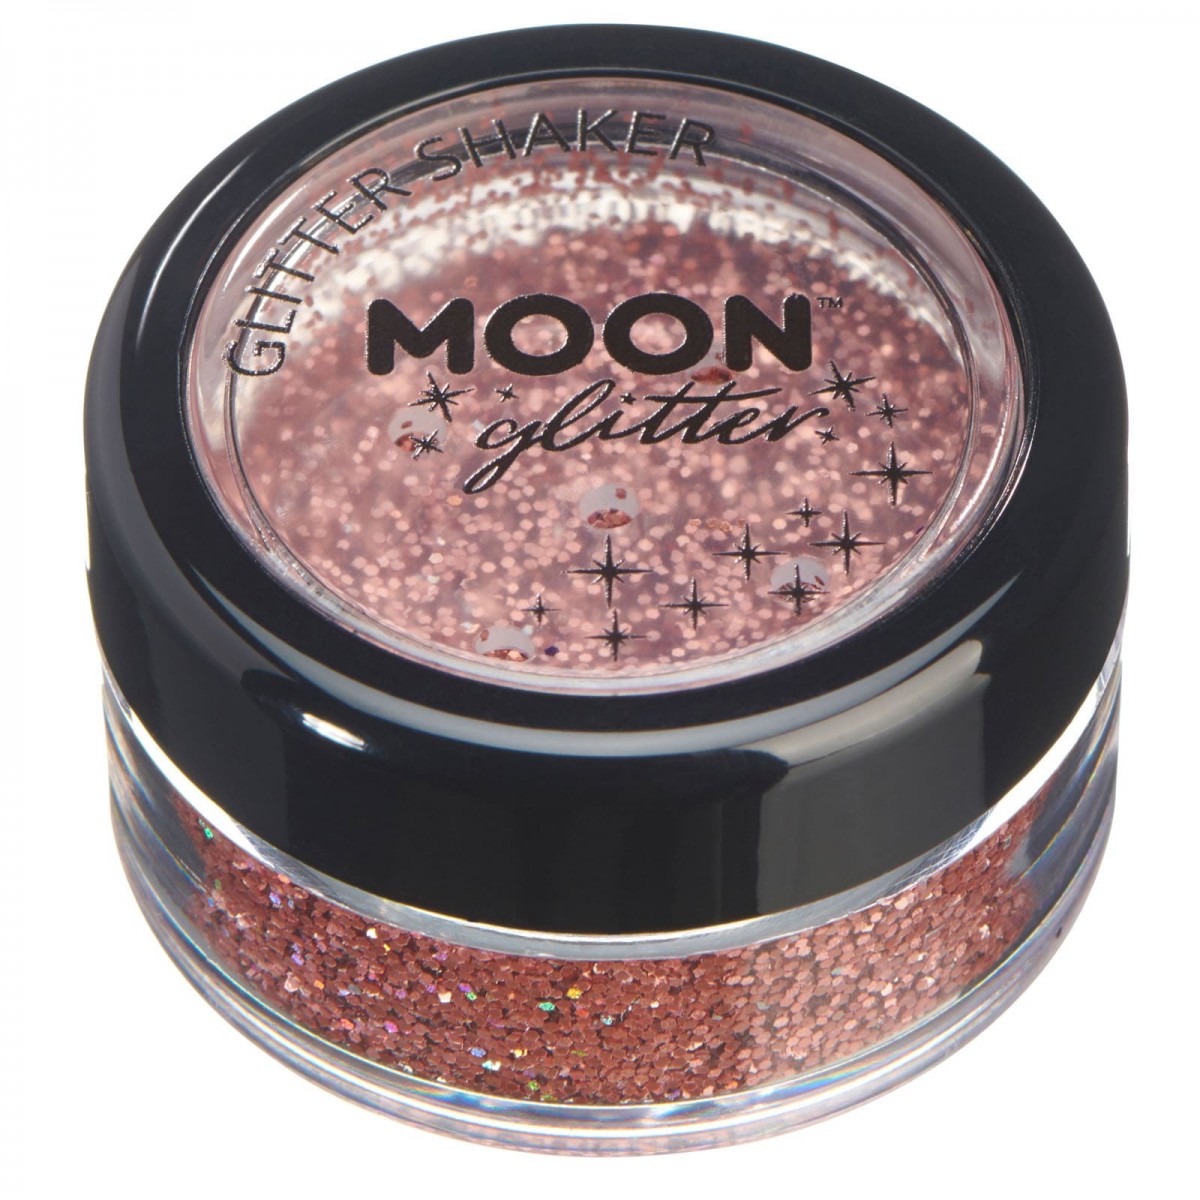 MOON CREATIONS G16 HOLOGRAPHIC GLITTER SHAKER ROSE GOLD 5g